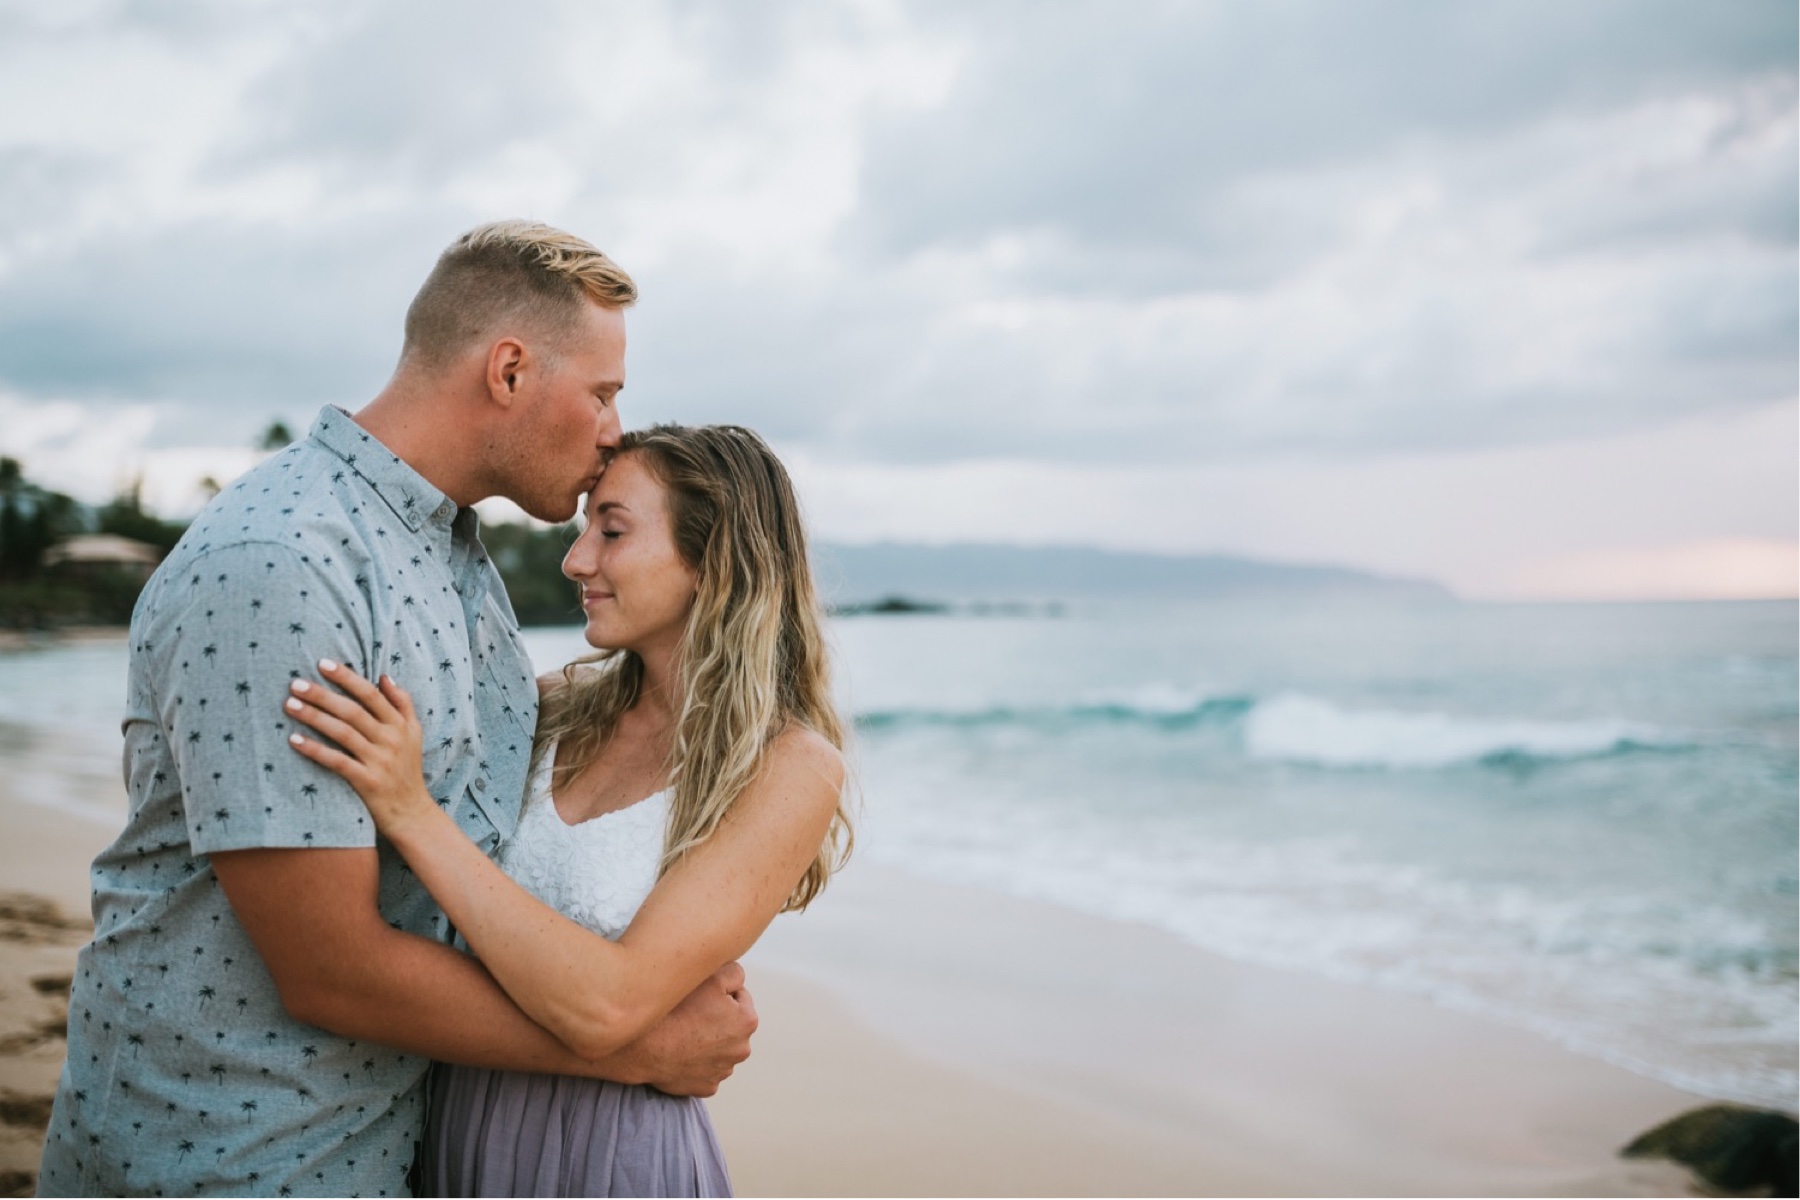 Couple standing on beach he is kissing her forehead